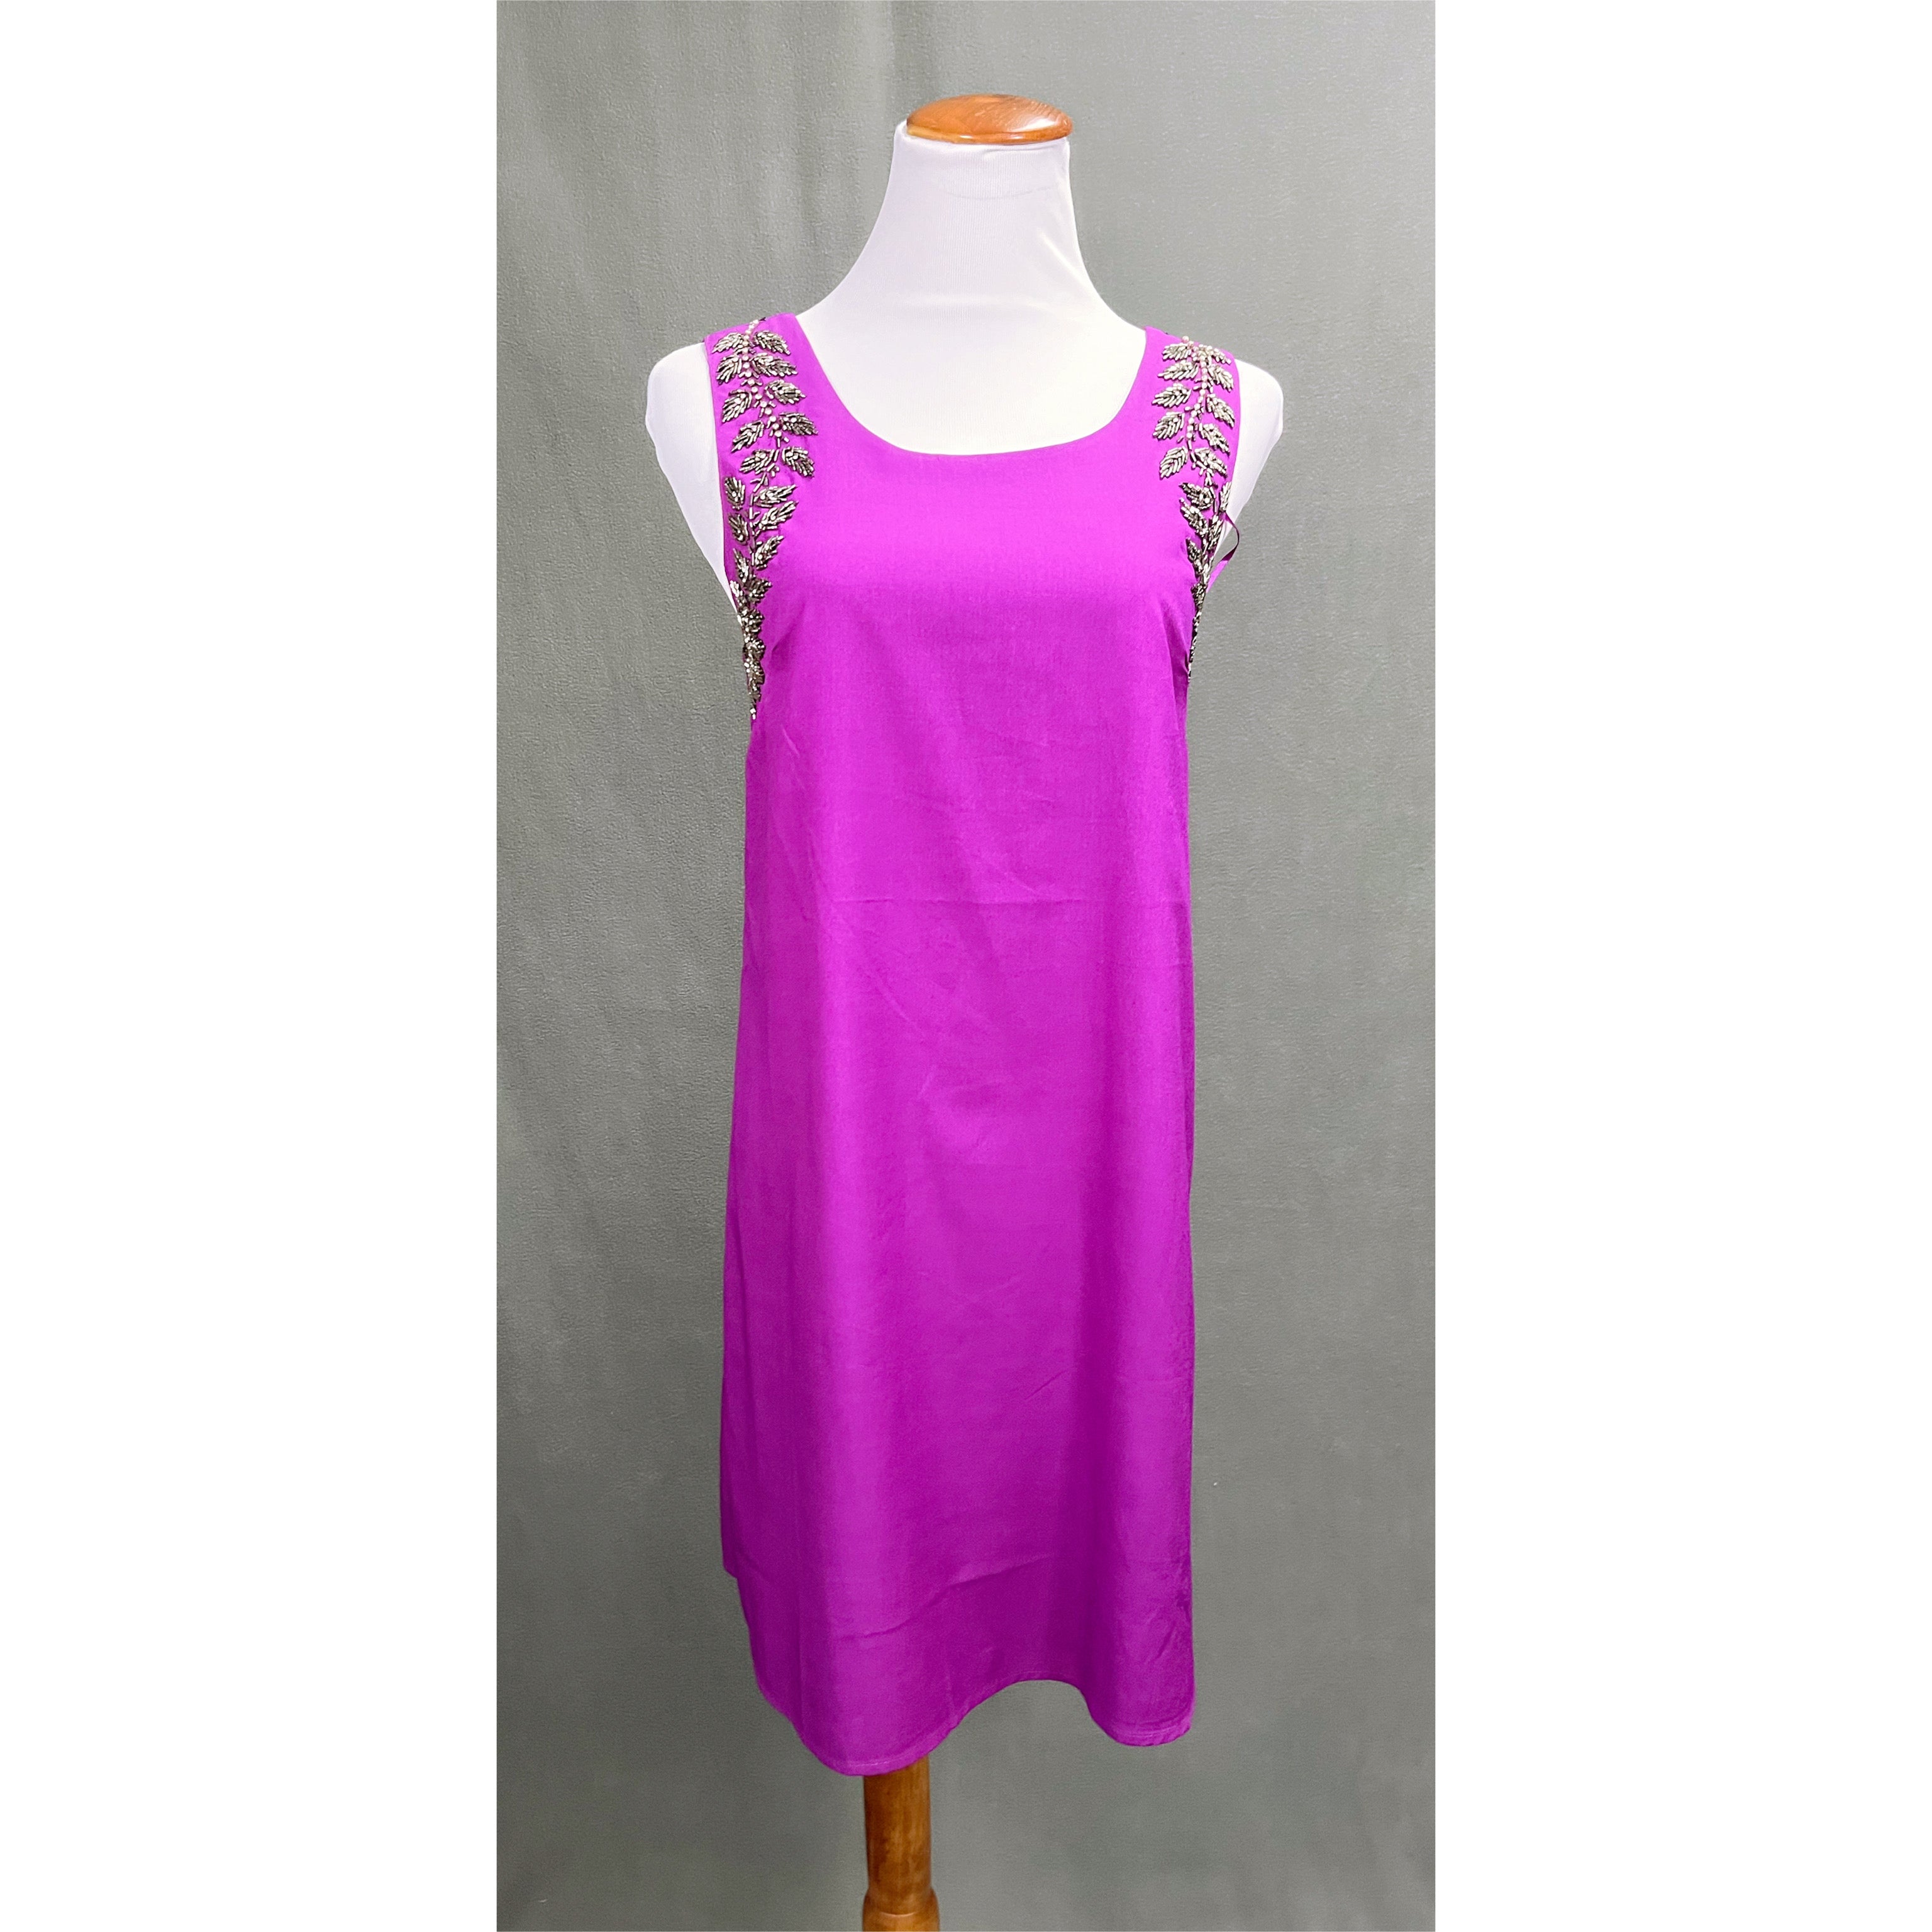 Sugar Lips magenta dress, size XS, NEW WITH TAGS!